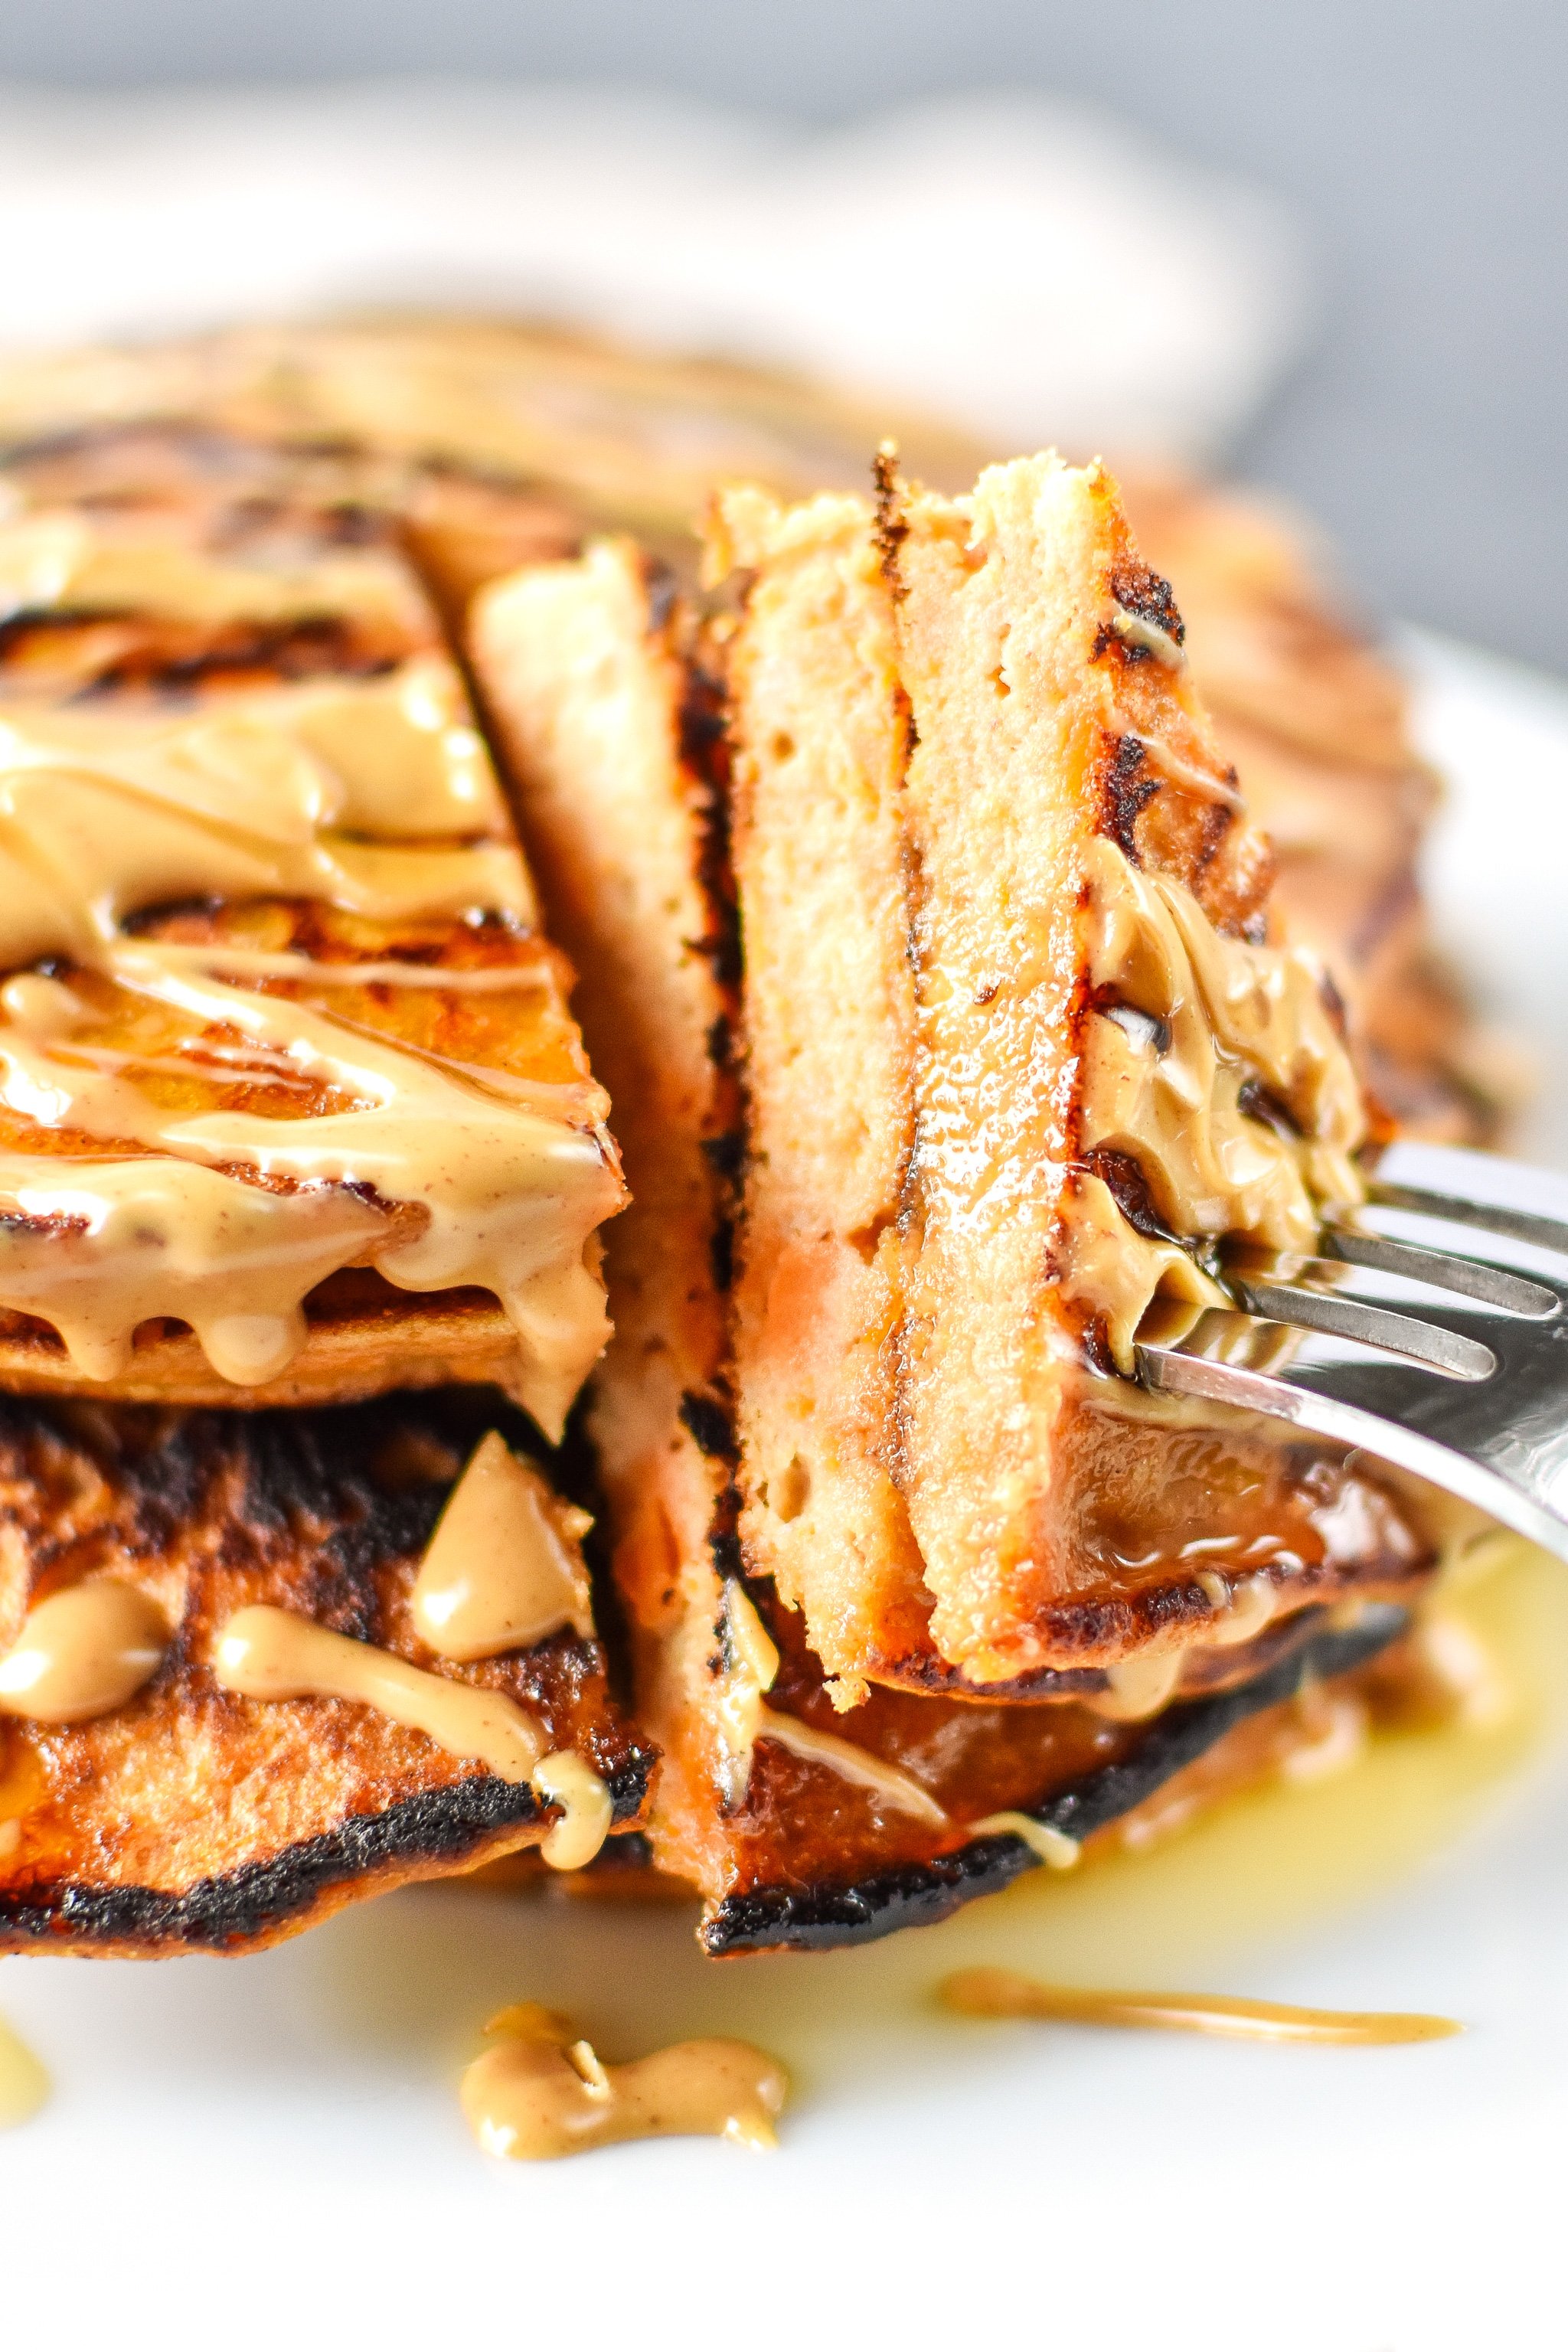 5-Ingredient Sweet Potato Banana Pancakes - Banana, sweet potato, nut butter, eggs and cinnamon are all you need to make these simple pancakes happen! - ProjectMealPlan.com